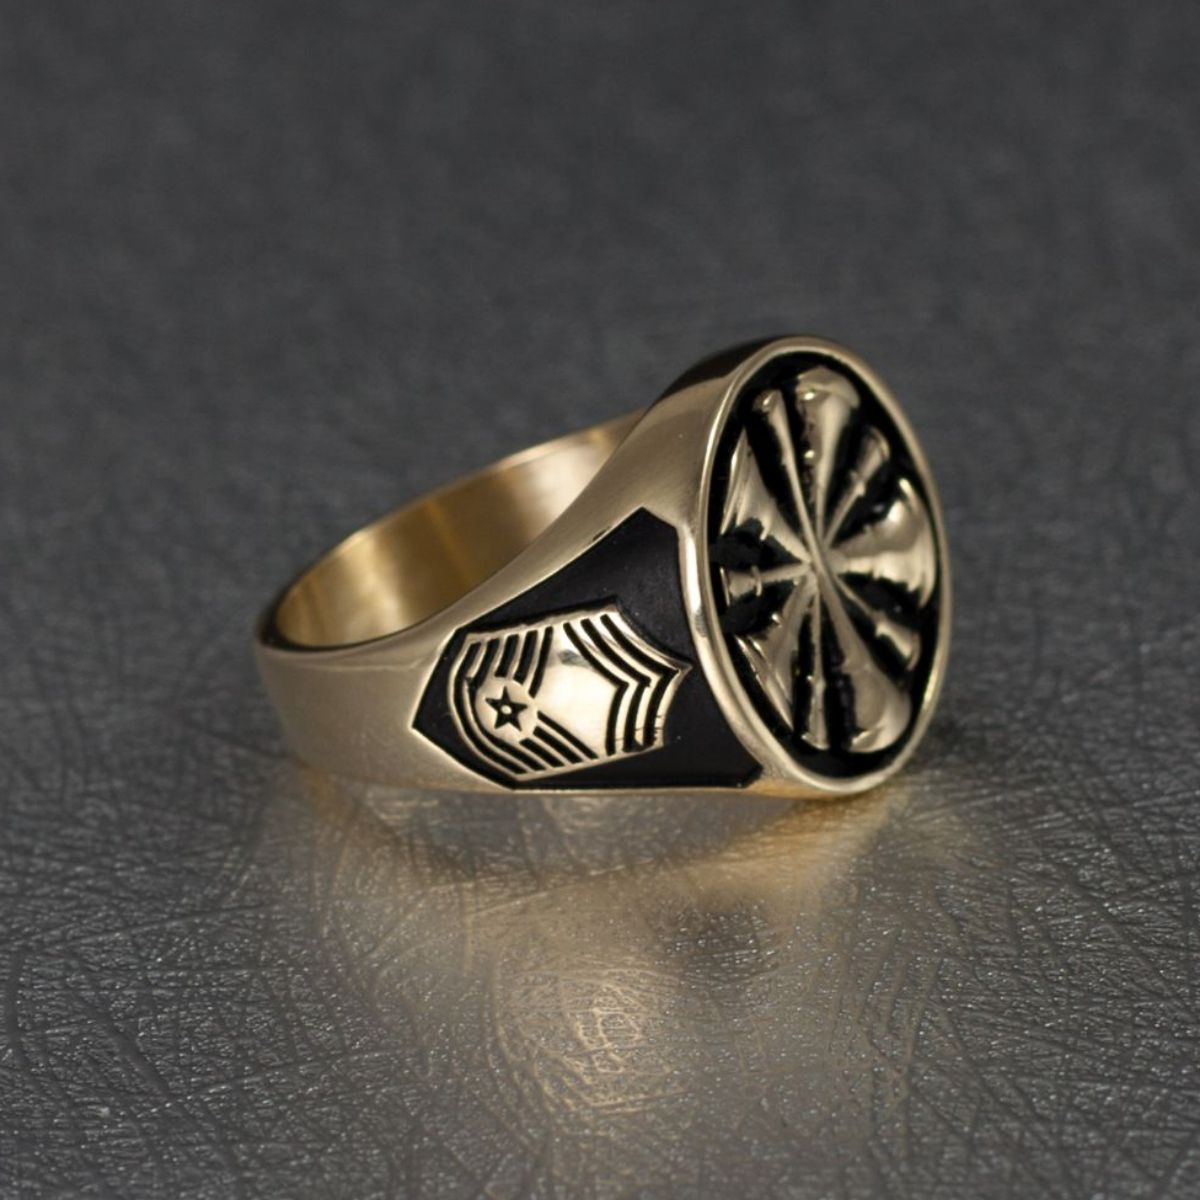 Custom Military Rings | Design Your Own Military Signet Ring ...